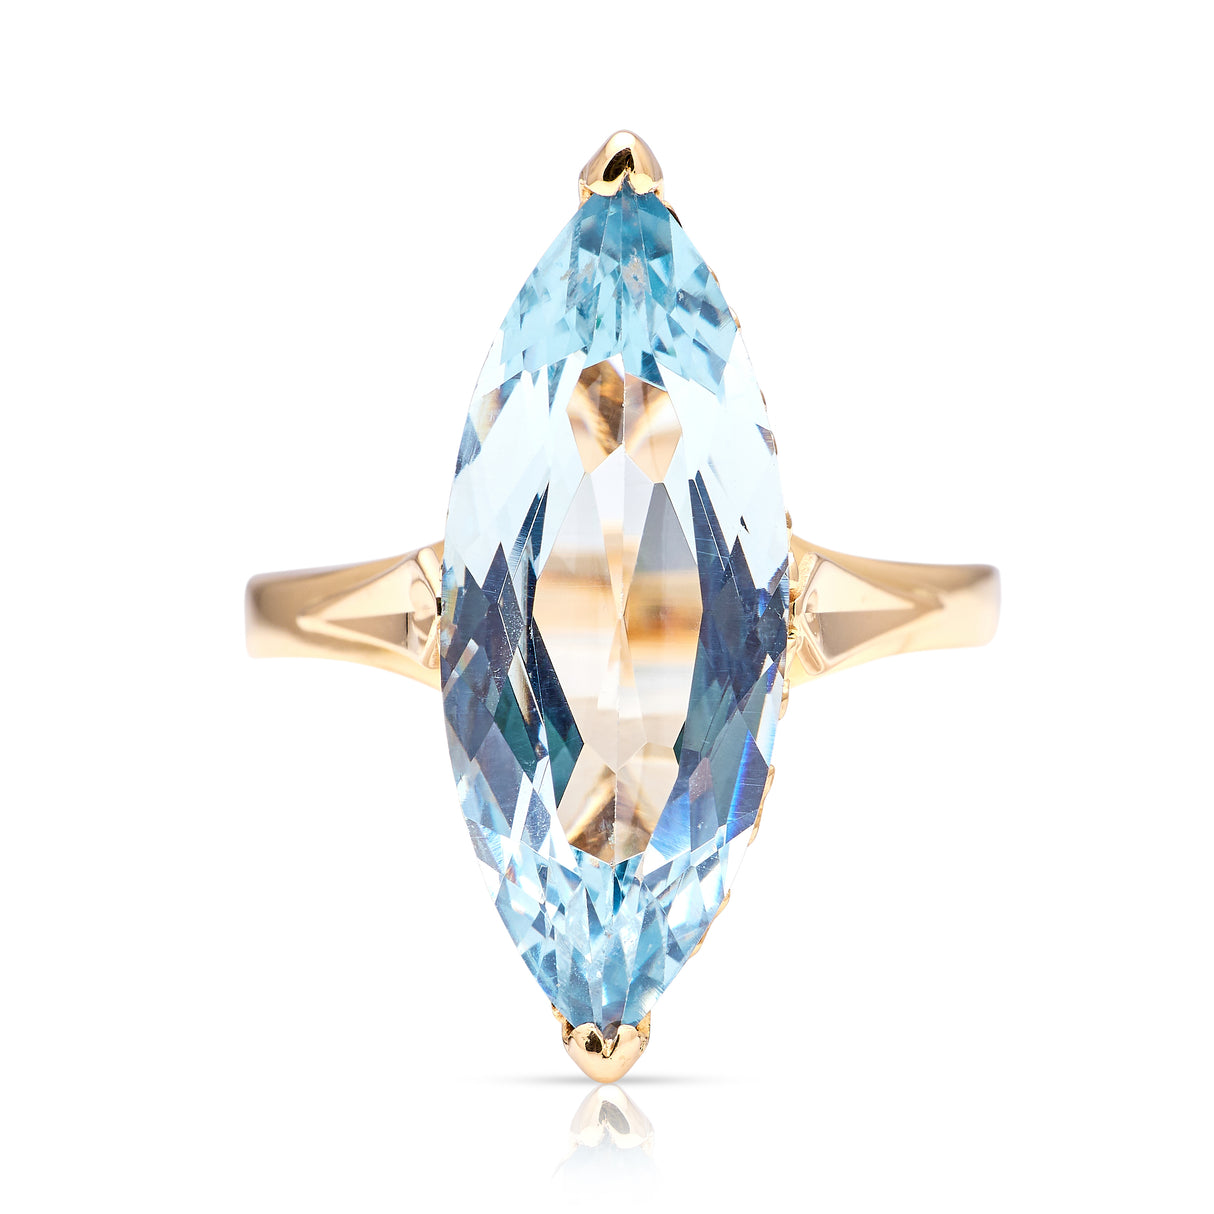 Antique French marquise-cut aquamarine ring, 18ct yellow gold